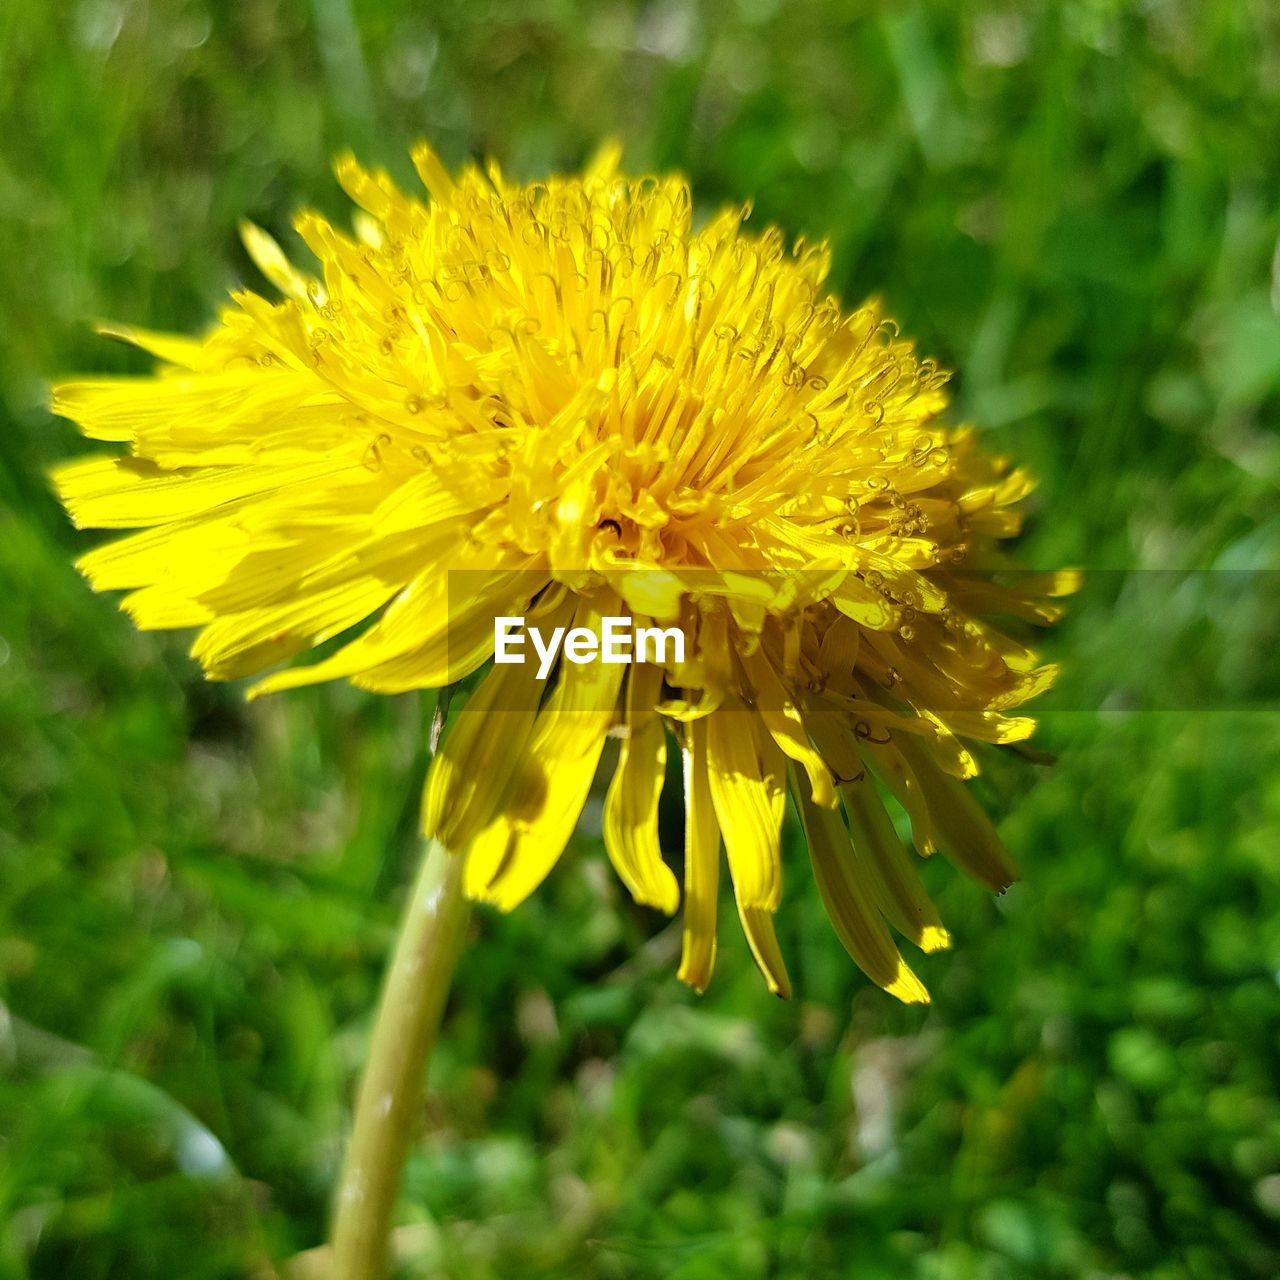 CLOSE-UP OF YELLOW FLOWER BLOOMING OUTDOORS